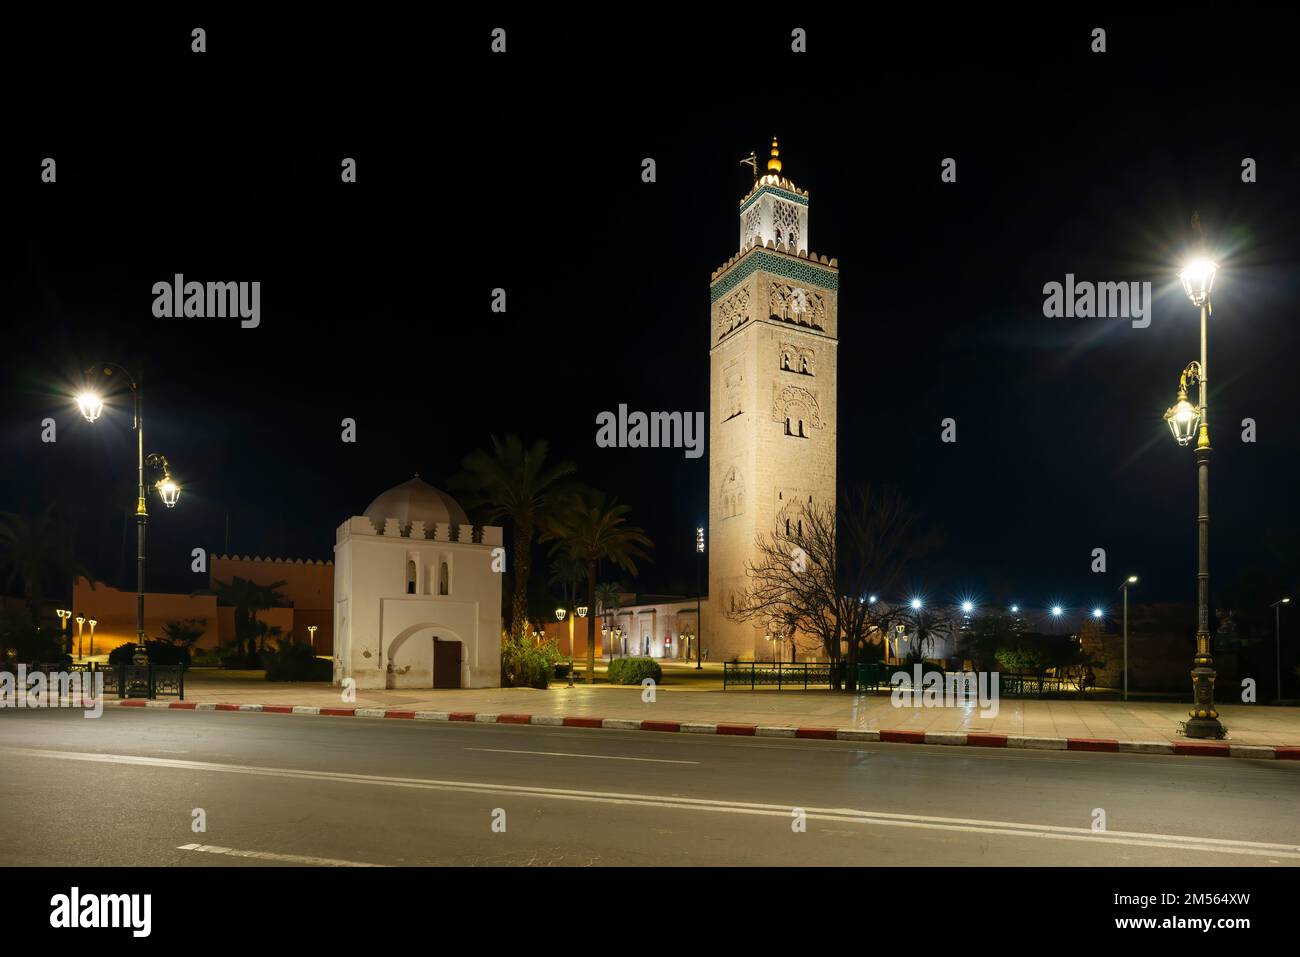 View of the Koutoubia Mosque at night, Marrakech, Morocco Stock Photo